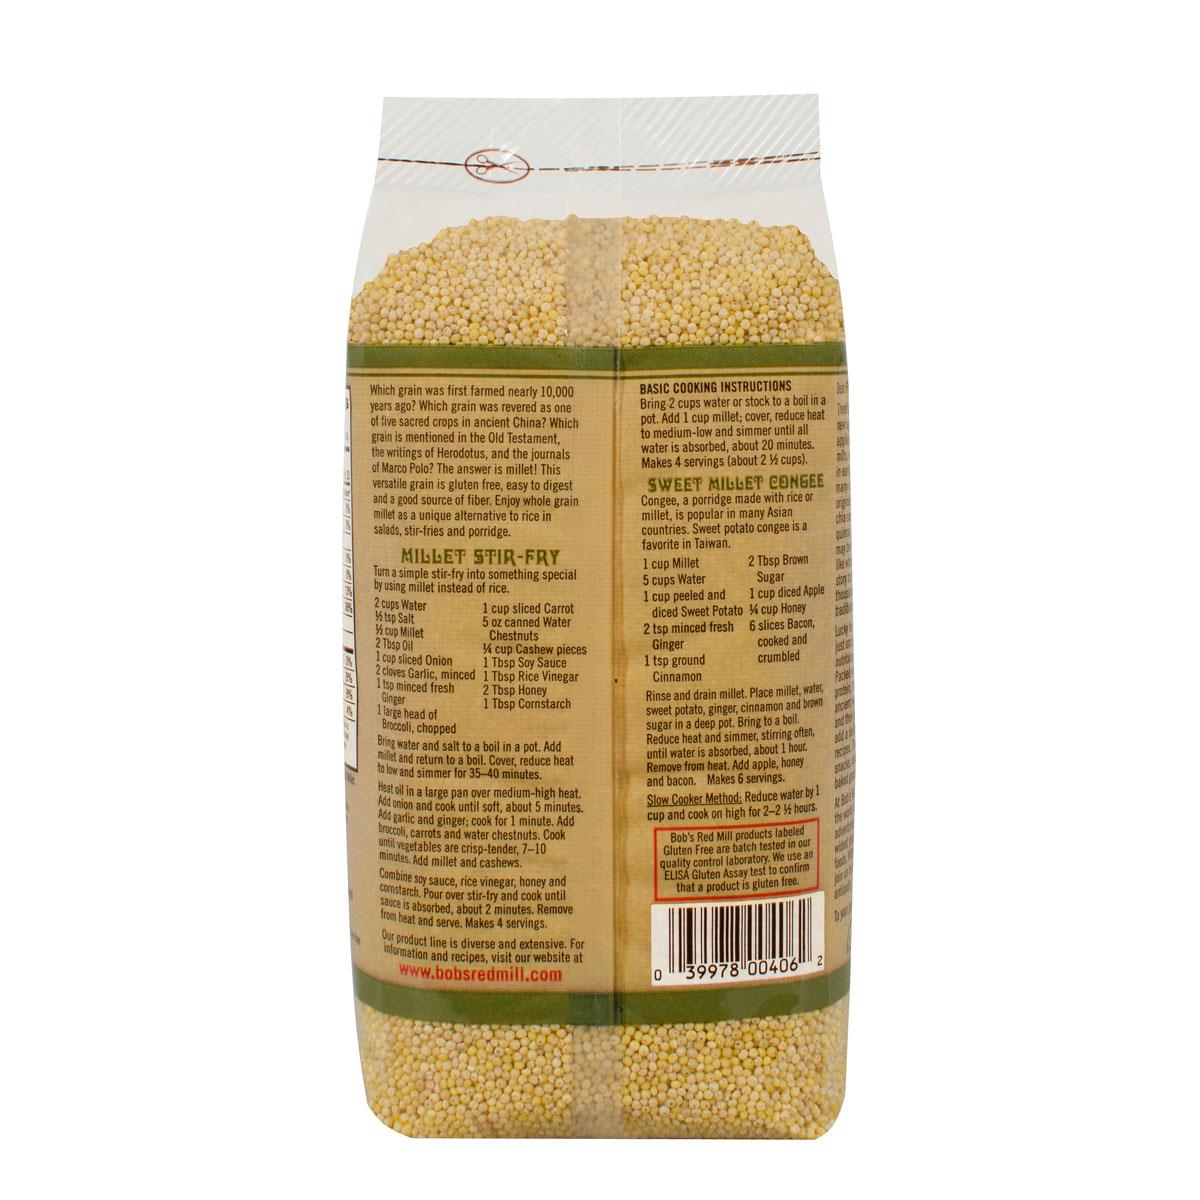 Bob's Red Mill Whole Grain Millet Nutritional Panel